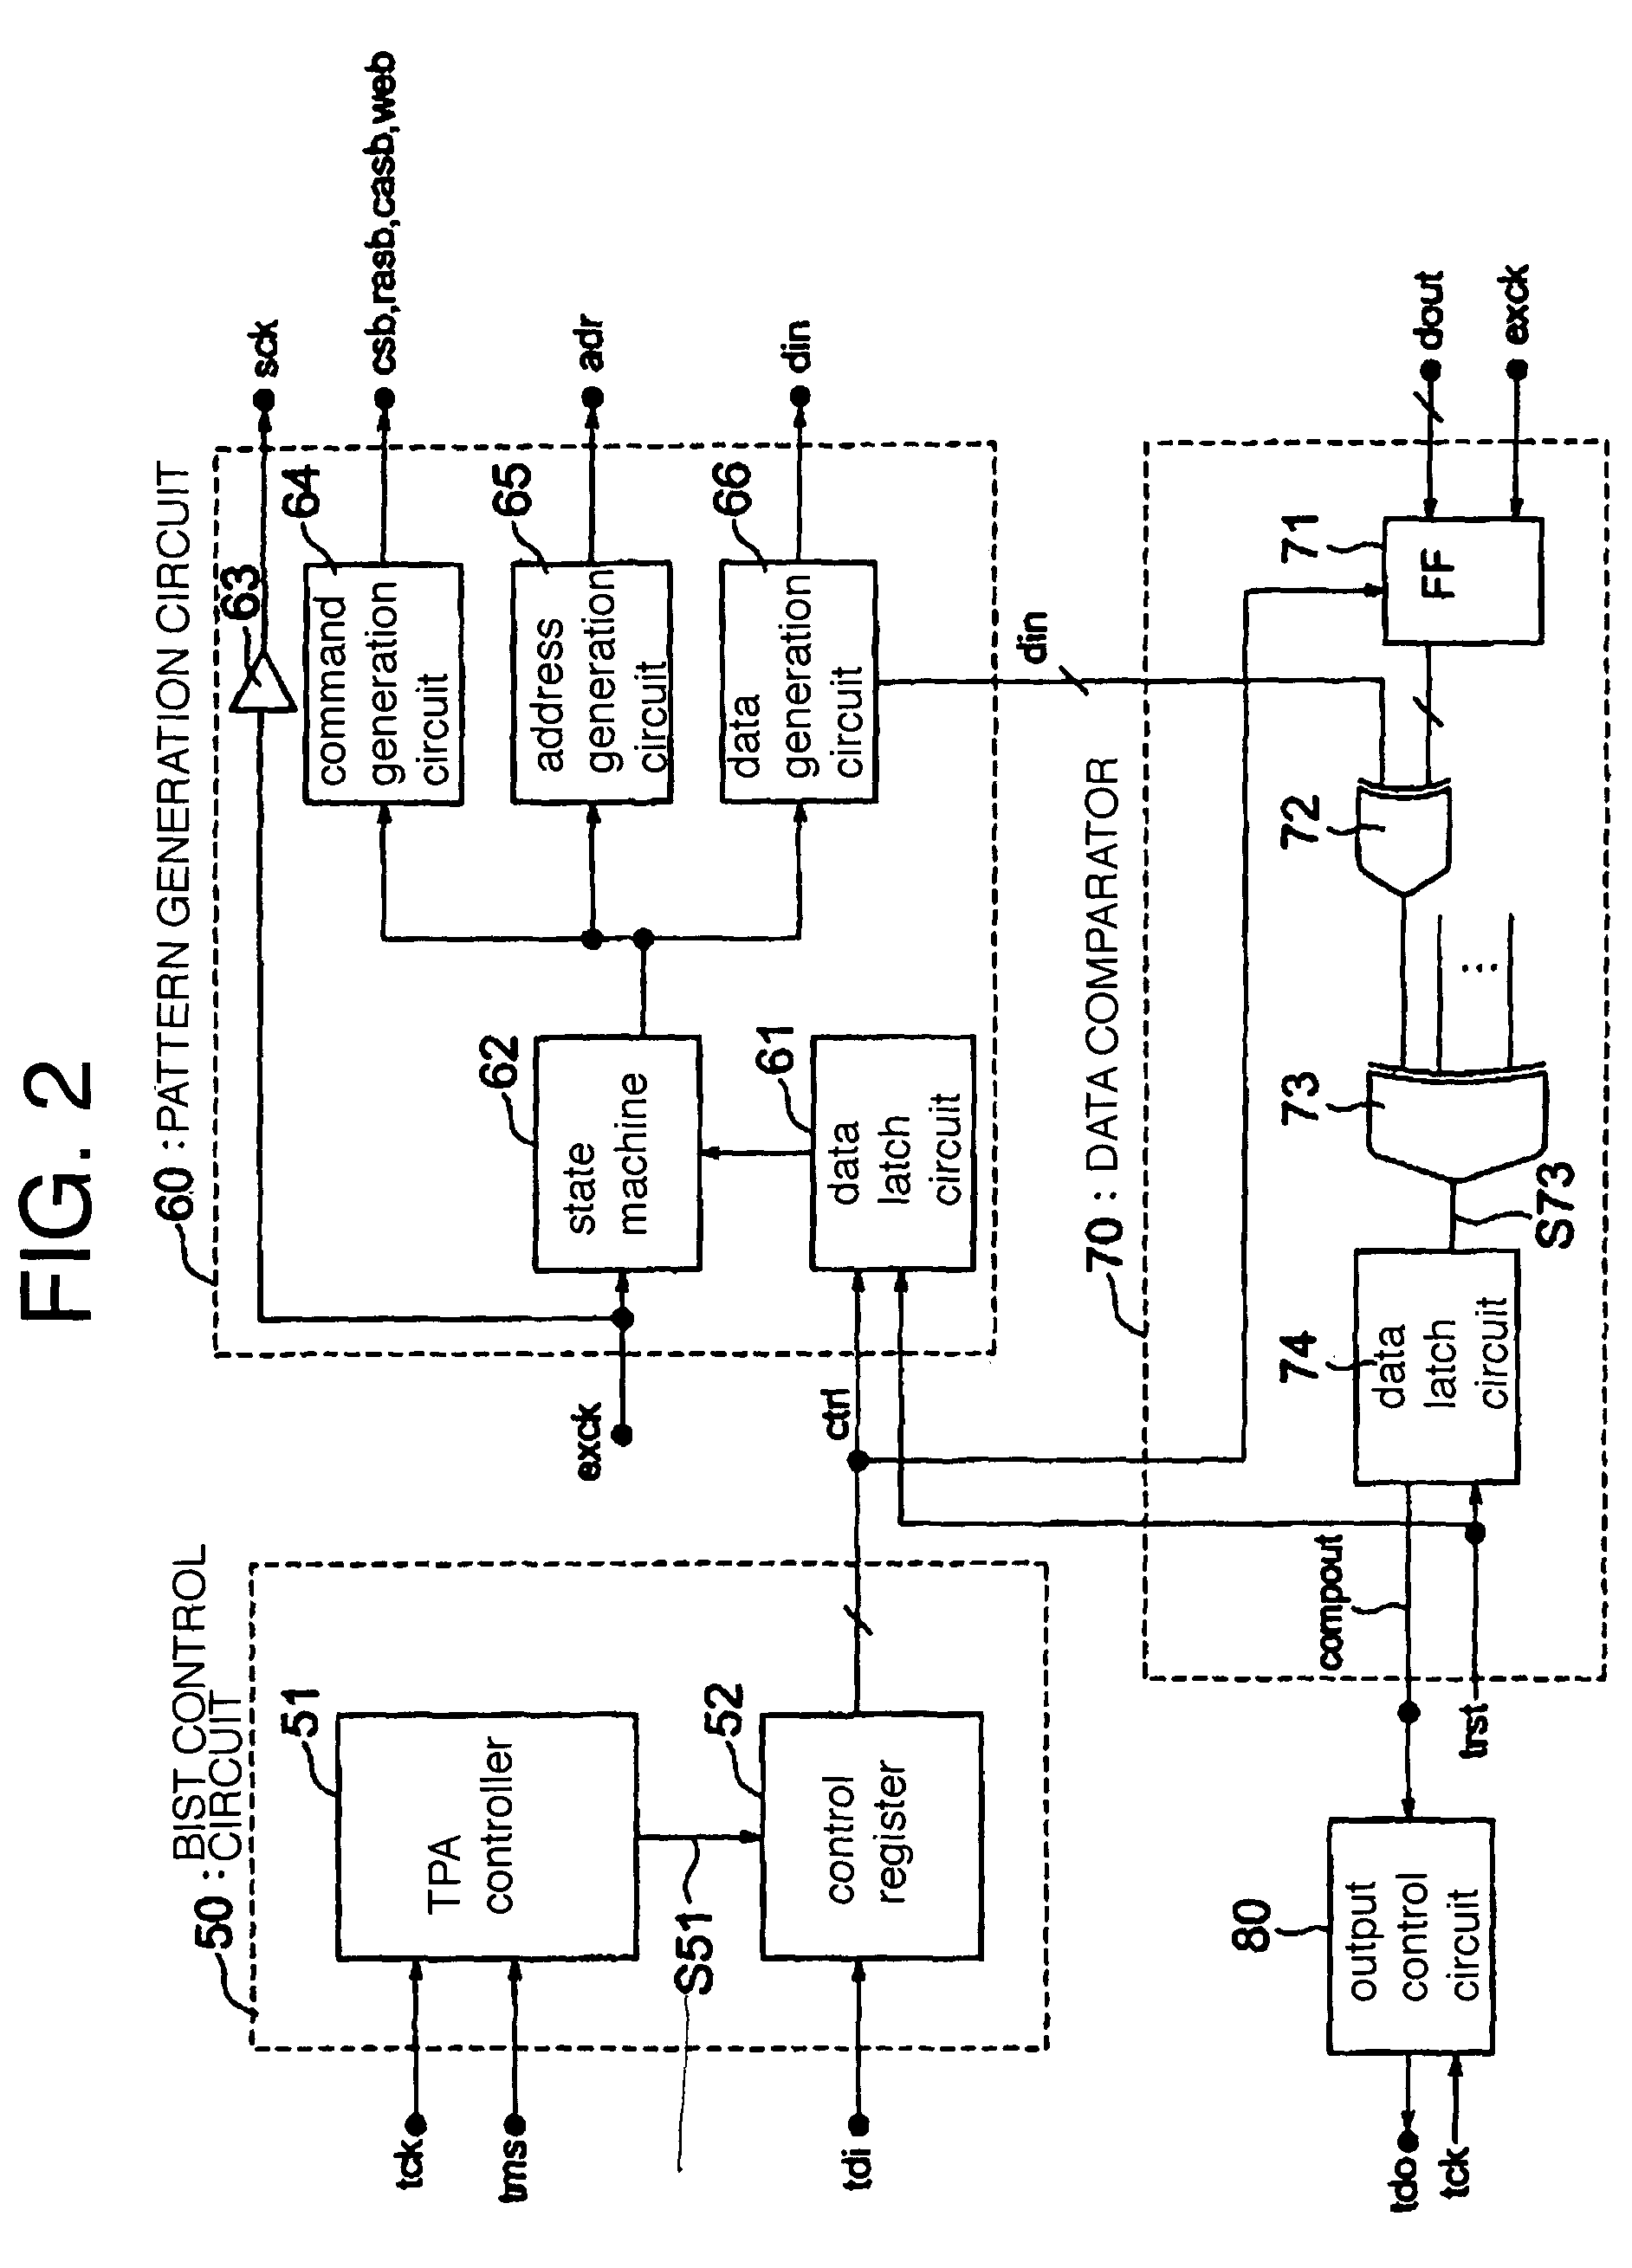 Test circuit provided with built-in self test function